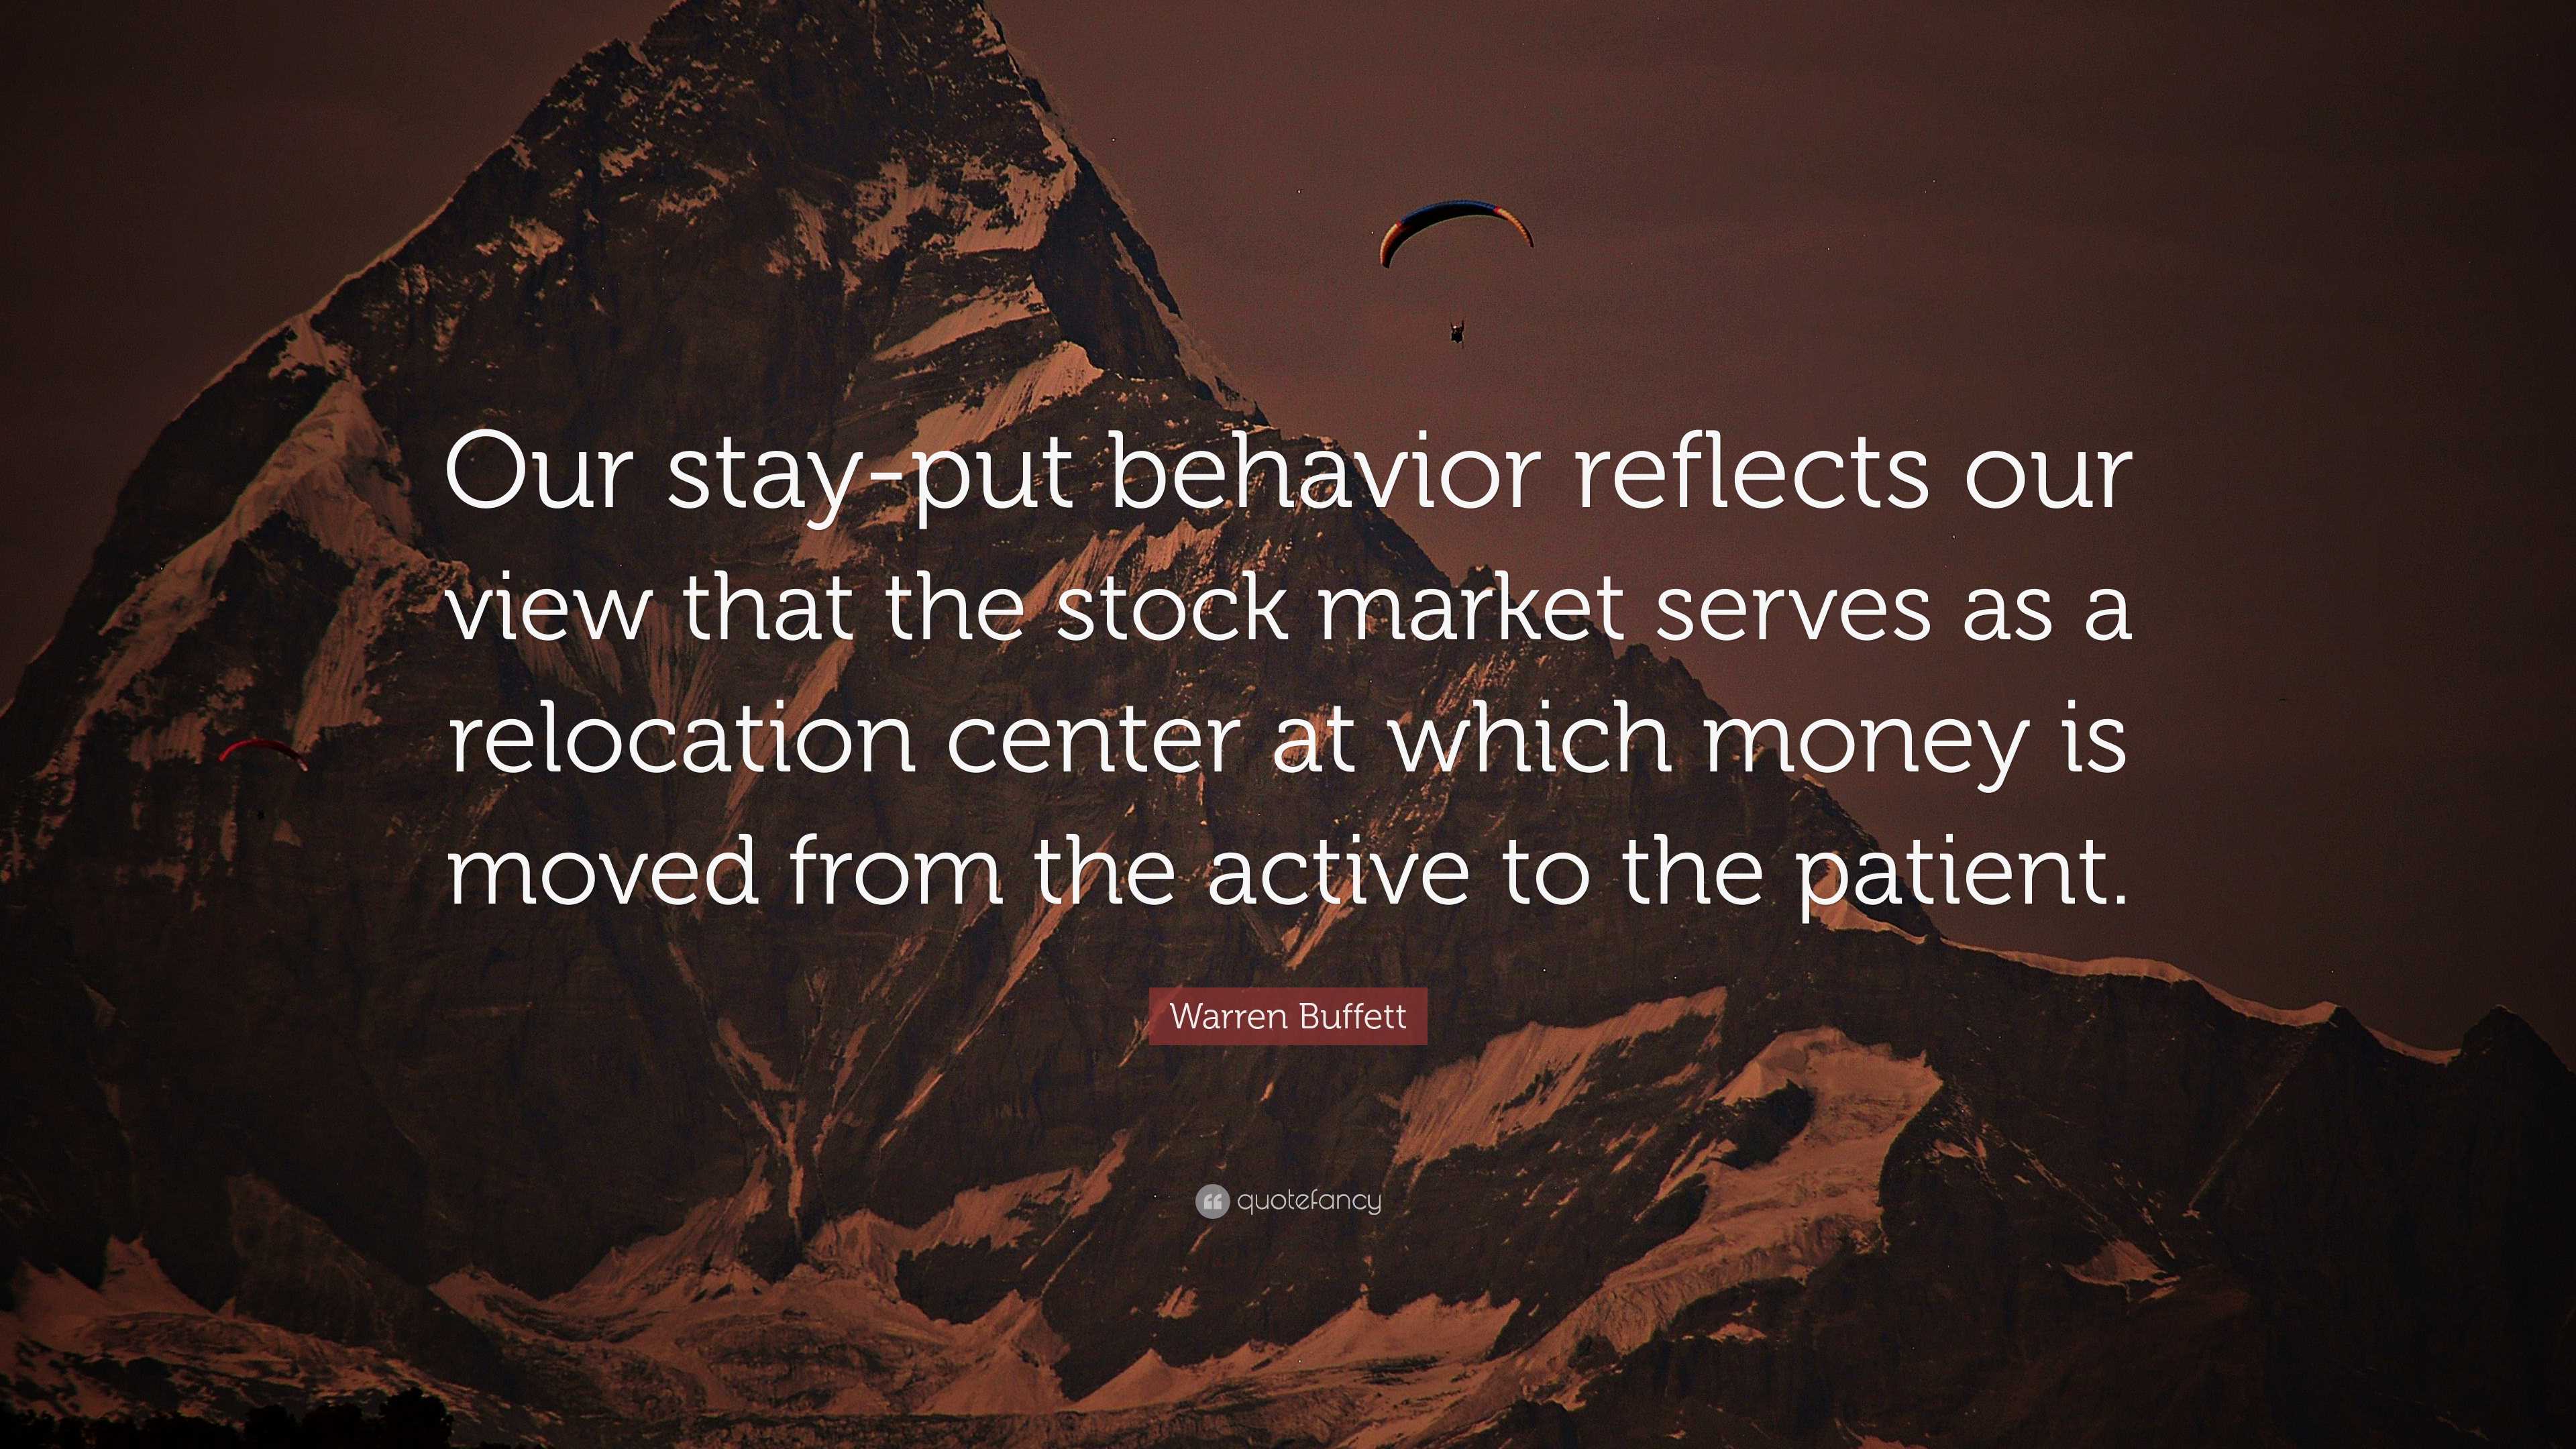 Warren Buffett Quote: “Our stay-put behavior reflects our view